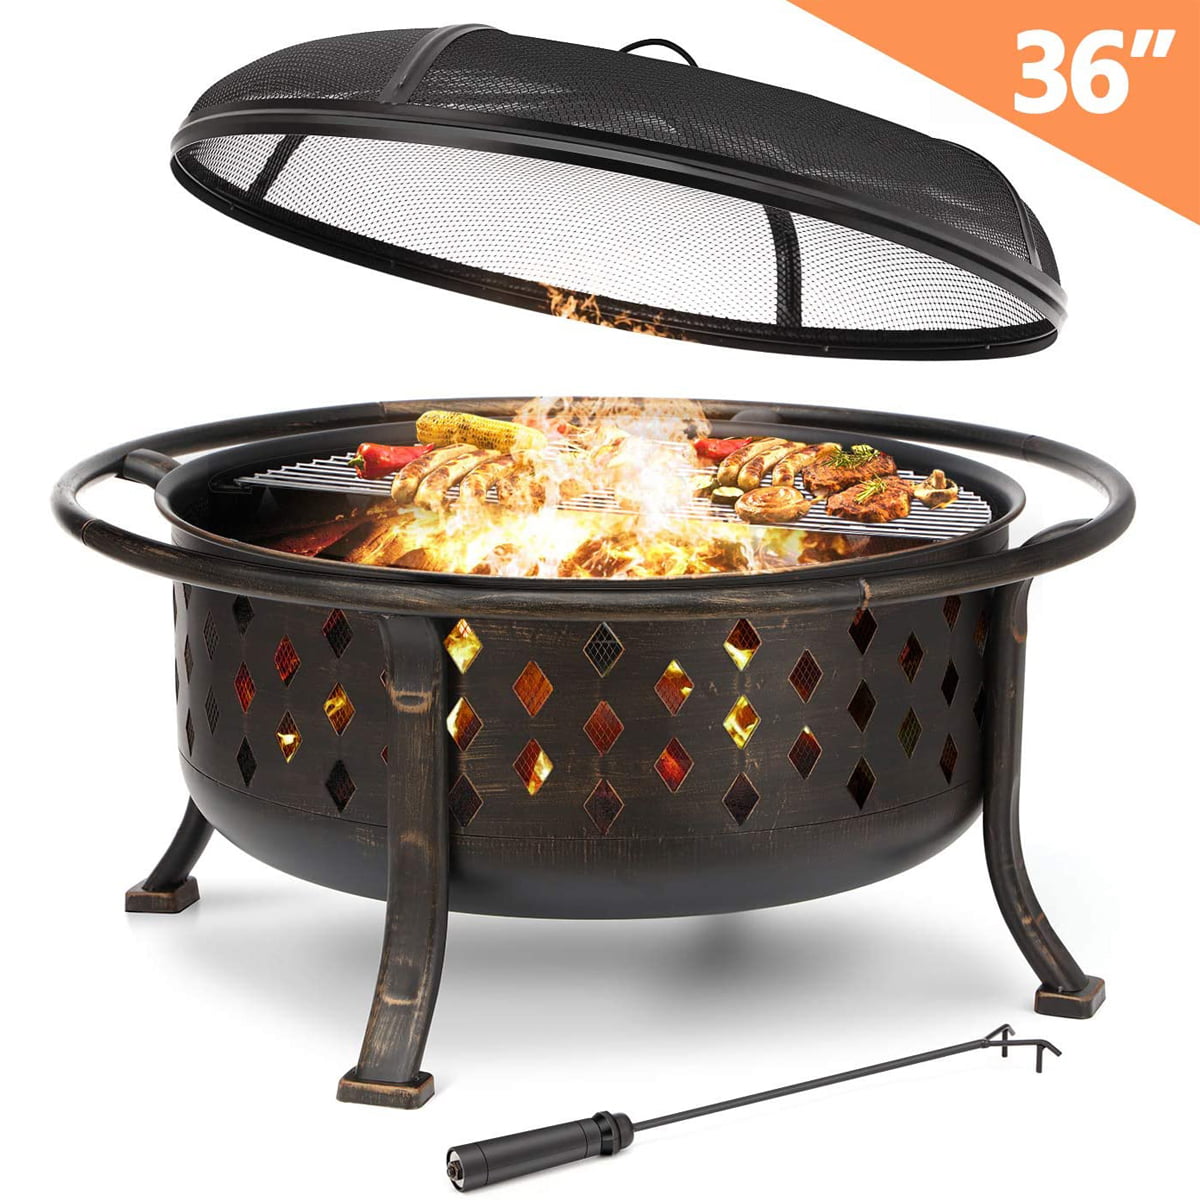 36 Inch Outdoor Fire Pit, 2 in 1 Large Wood Burning Patio & Backyard Firepit  for Outside with Spark Screen, Fireplace Poker, and Round Cover, Bronze -  Walmart.com